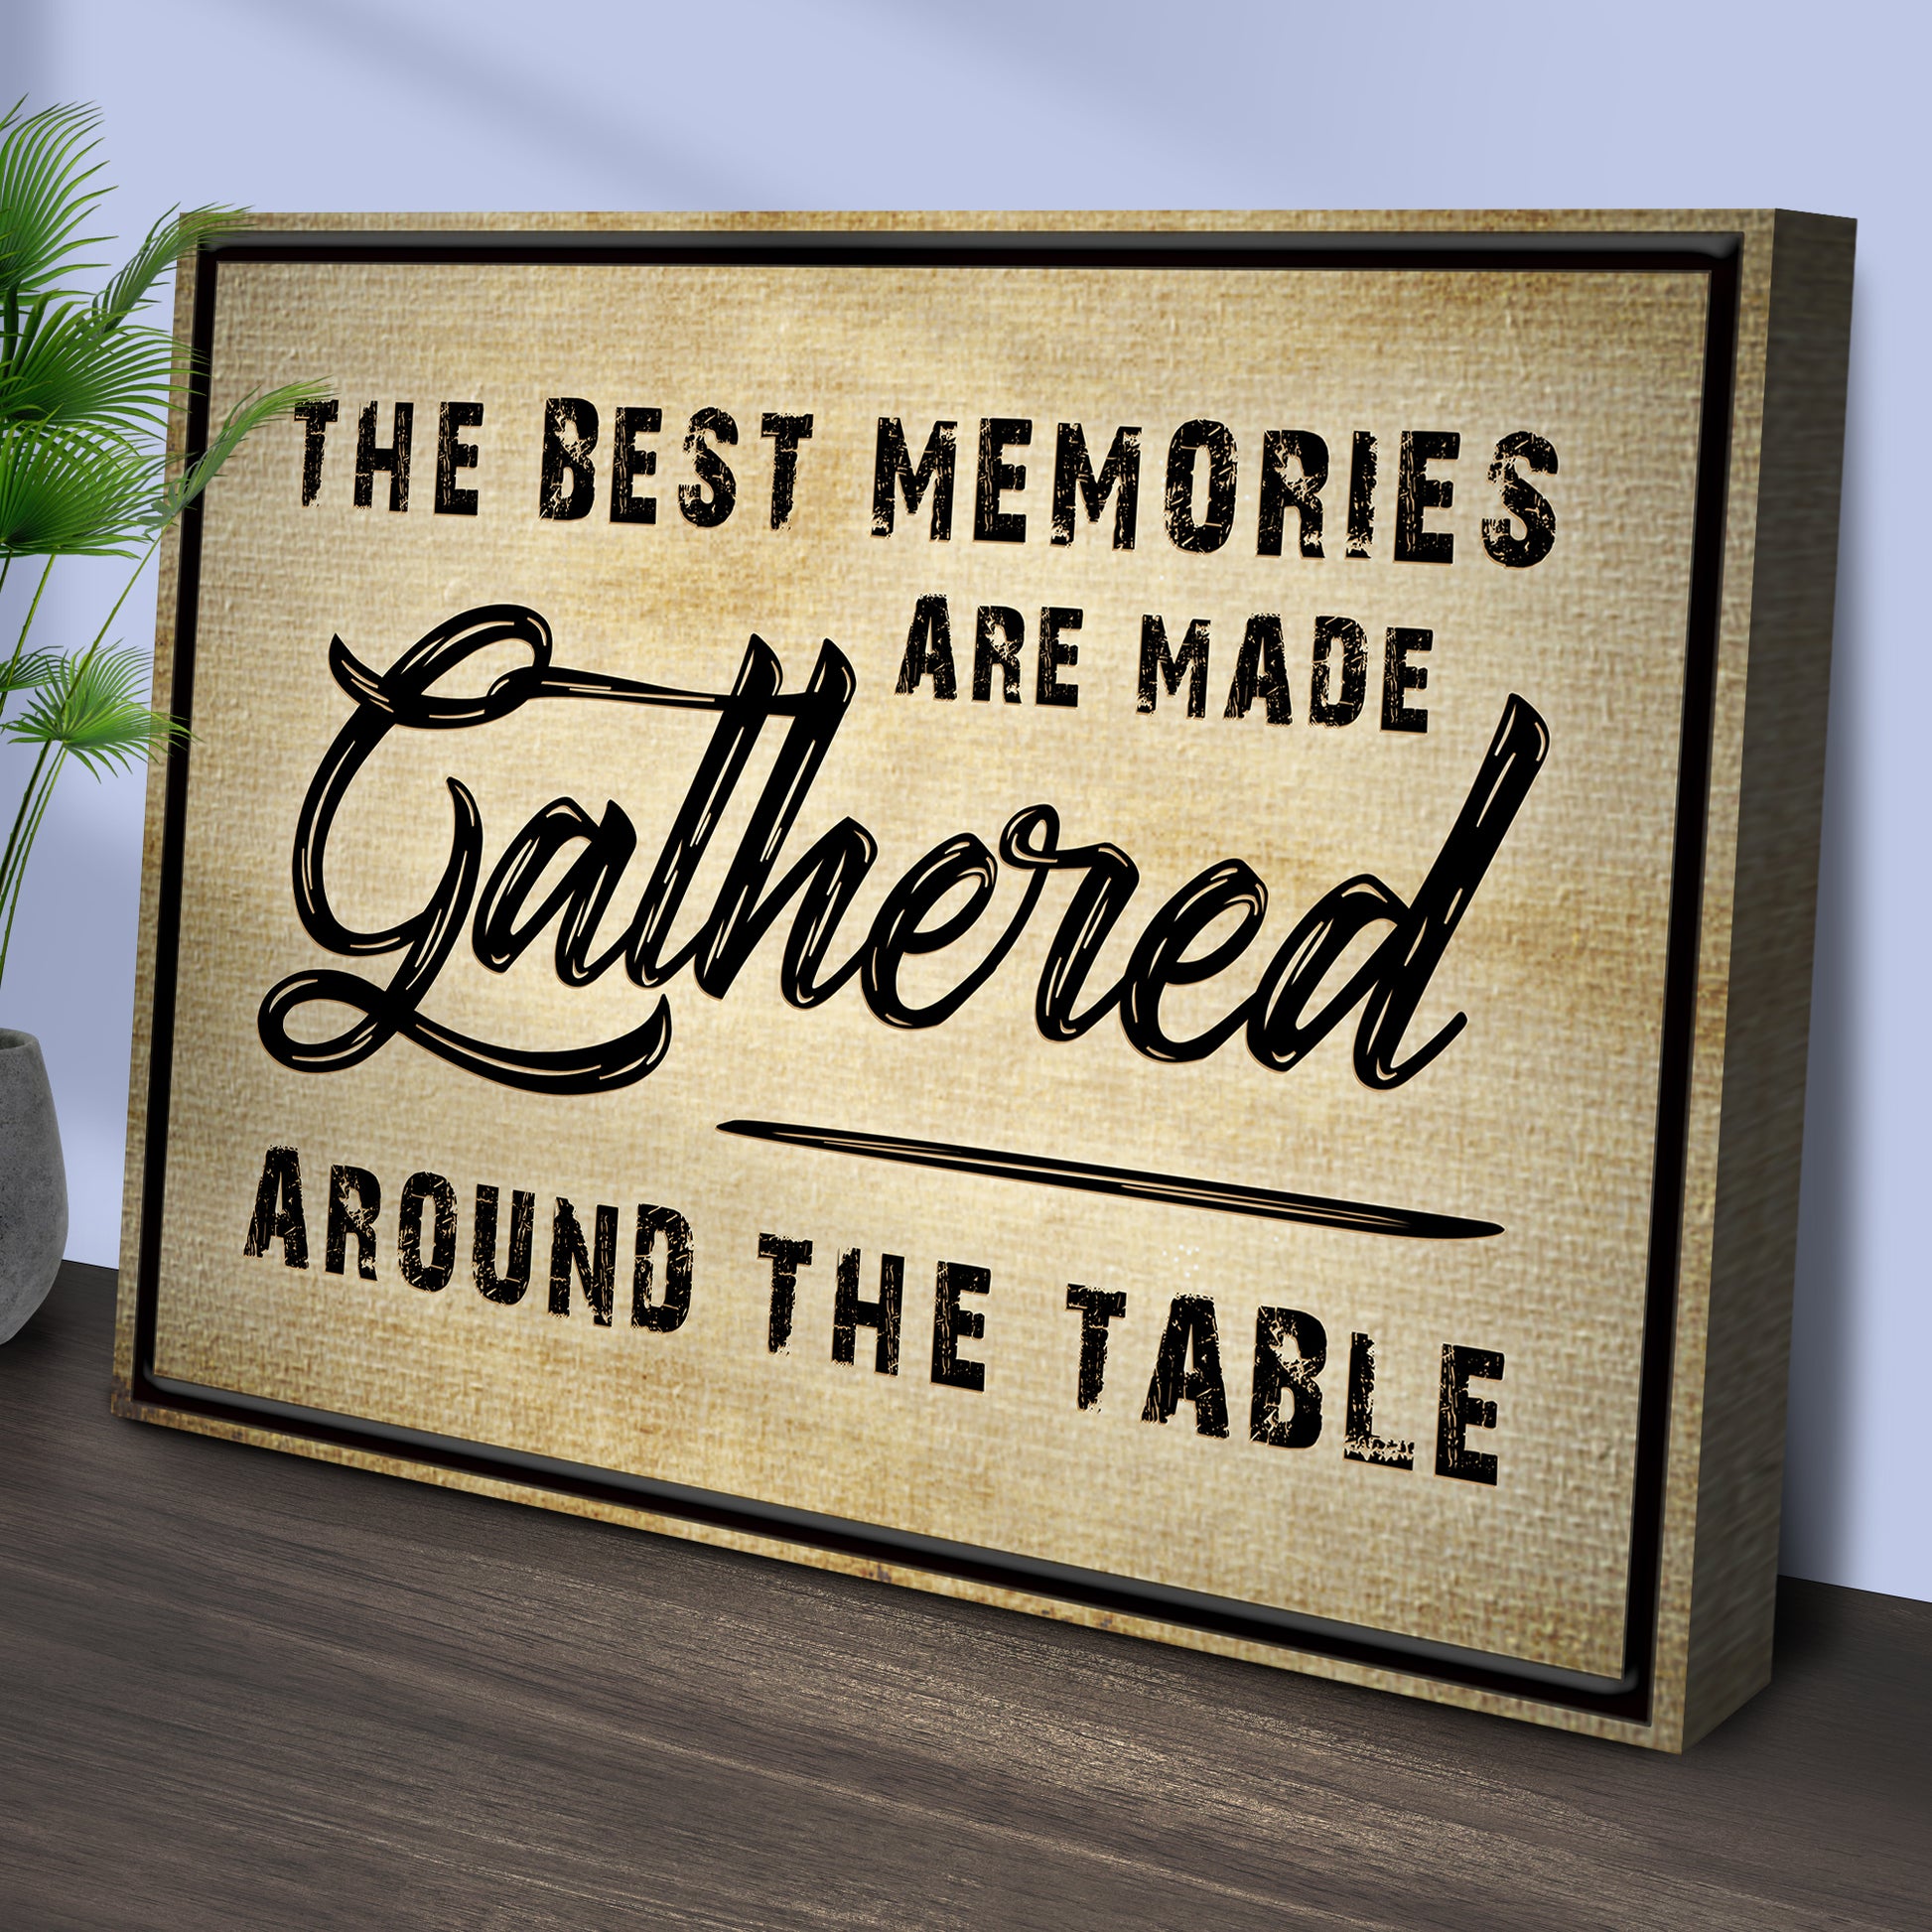 The Best Memories Are Made Gathered Around The Table Sign III Style 2 - Image by Tailored Canvases